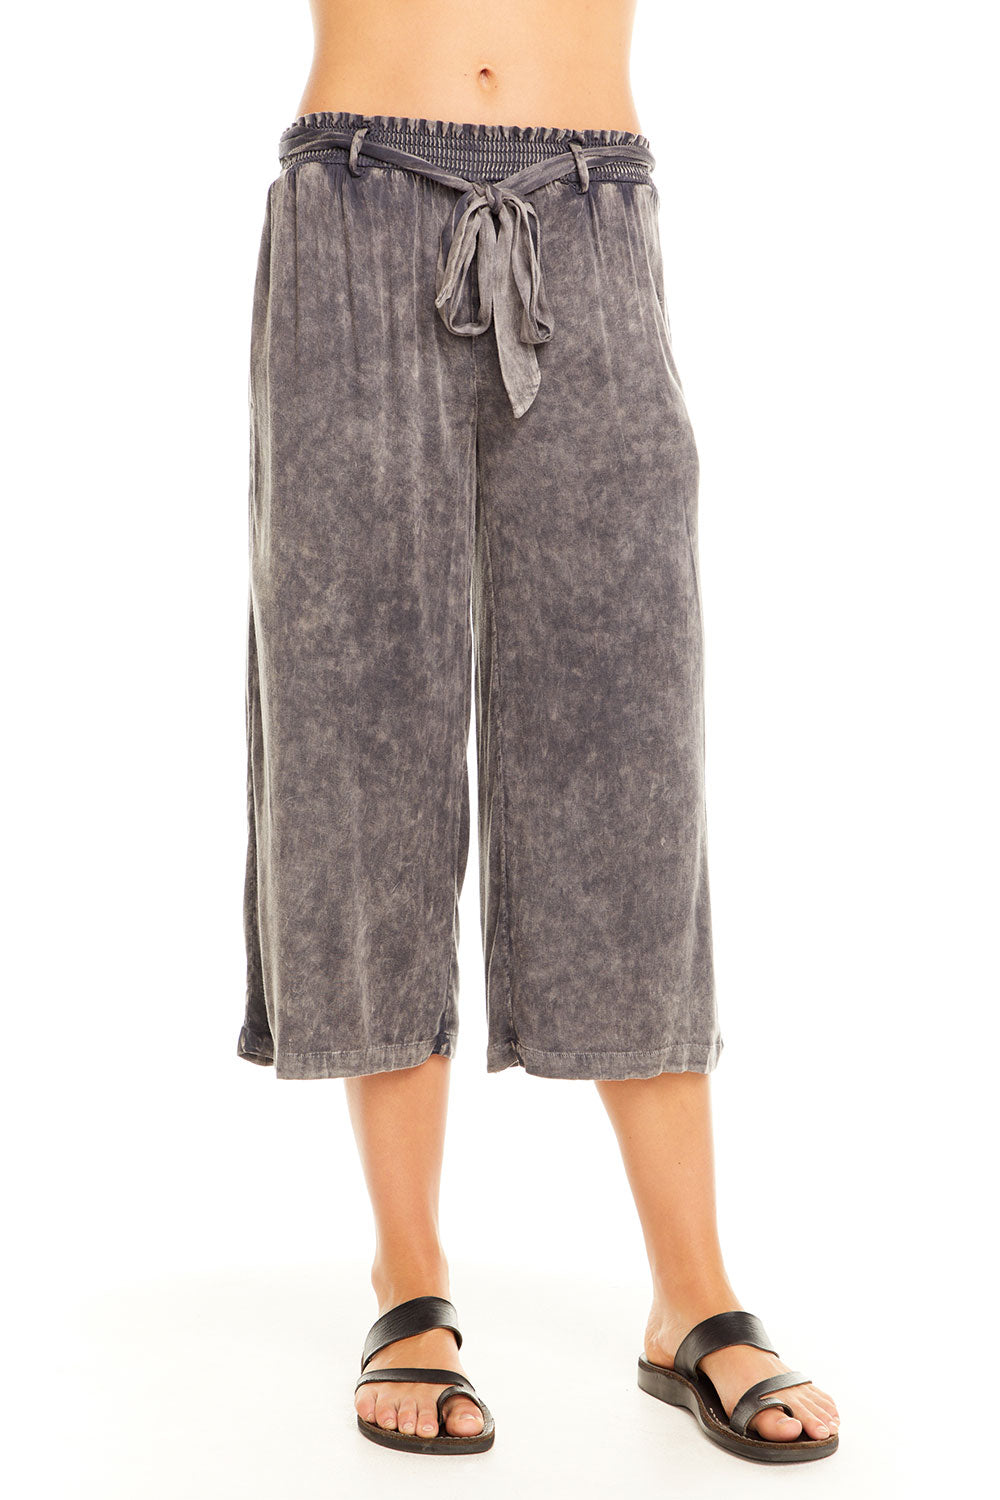 Heirloom Wovens Cropped Paperbag Waist Pant - chaserbrand.com